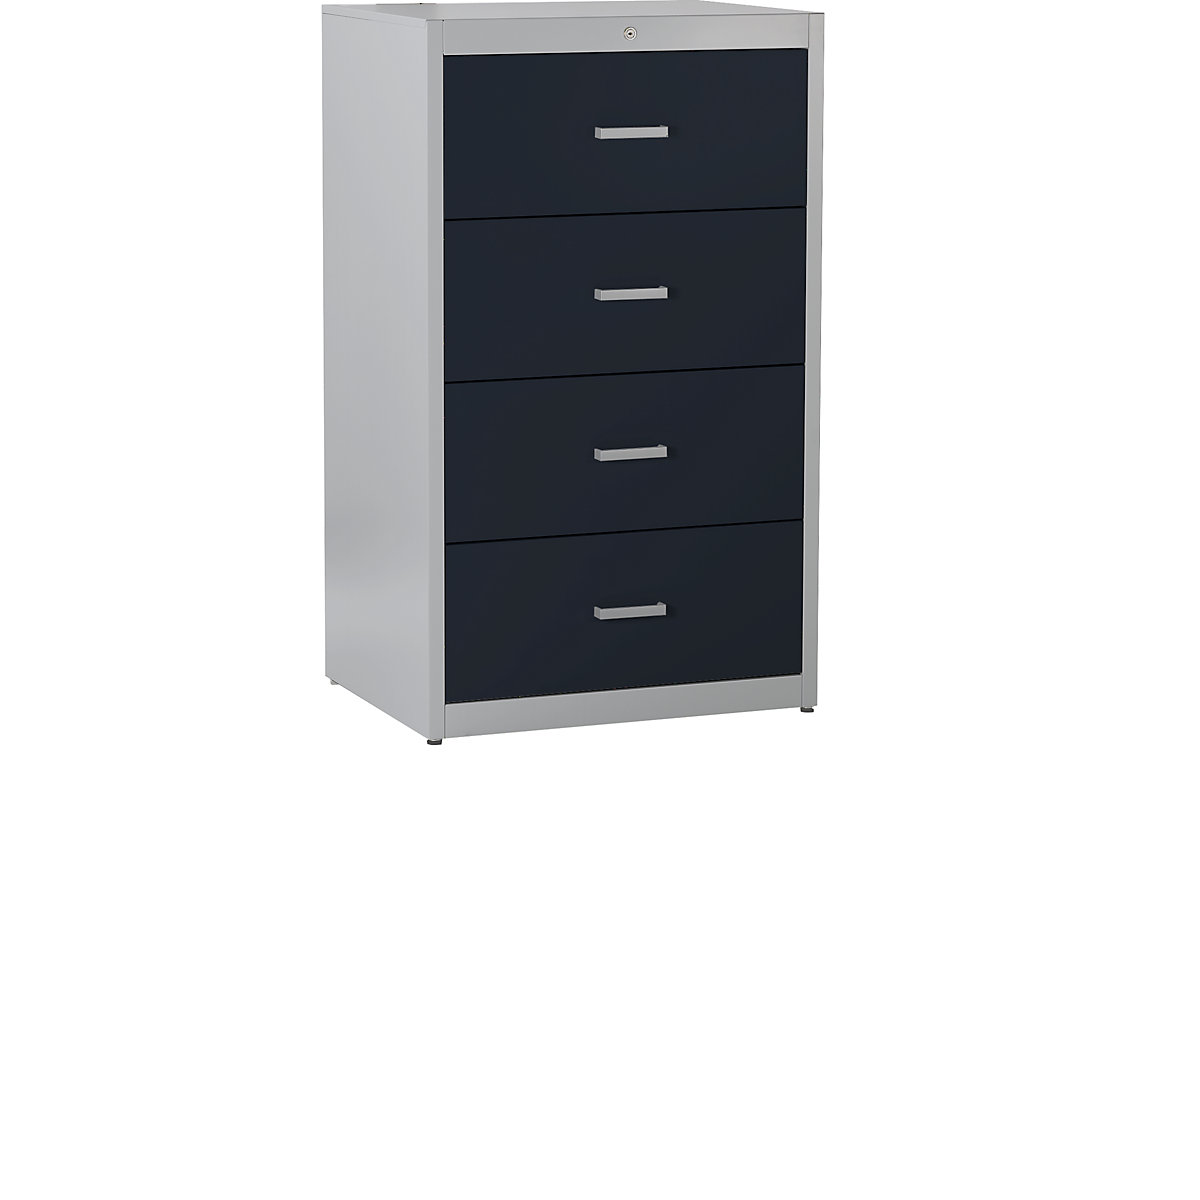 Suspension file cabinet, bar handles – mauser, 4 drawers, standard retraction mechanism, 2-track, white aluminium / charcoal-5